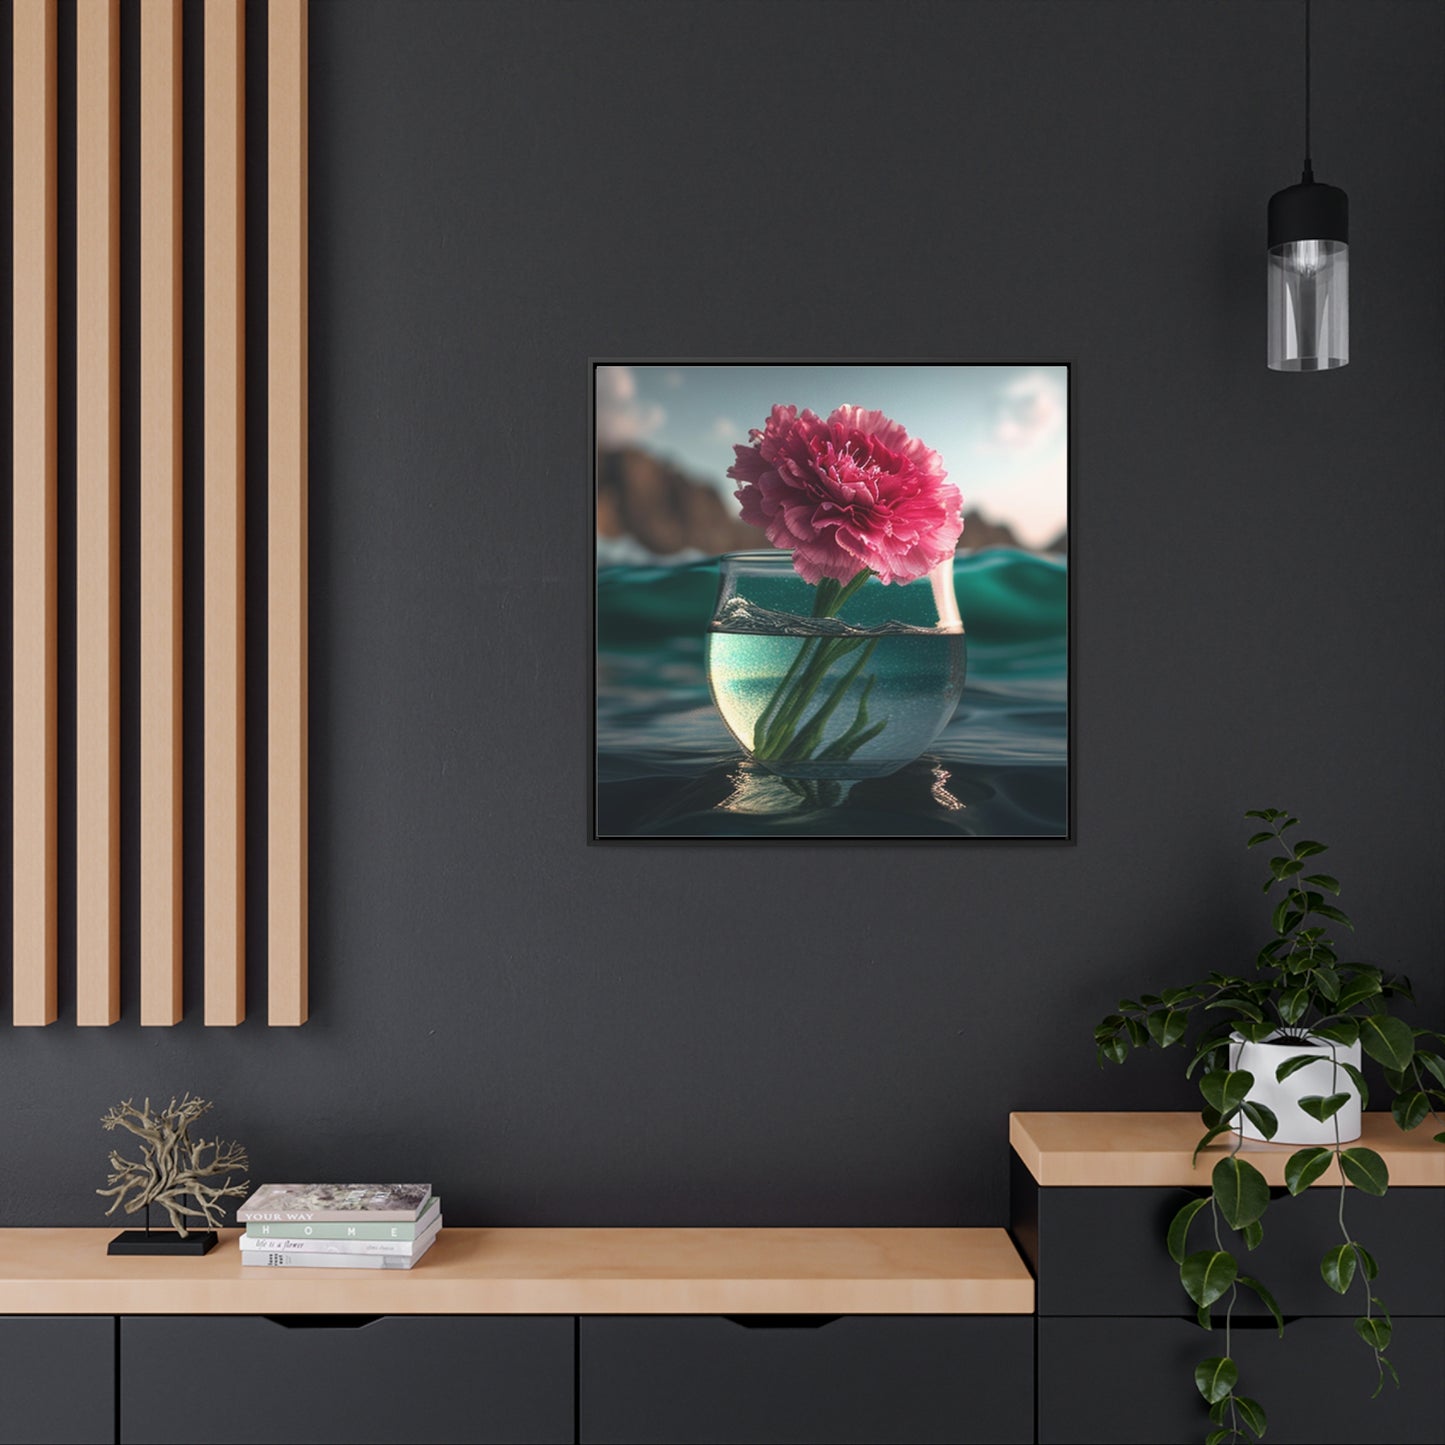 Gallery Canvas Wraps, Square Frame Carnation 1